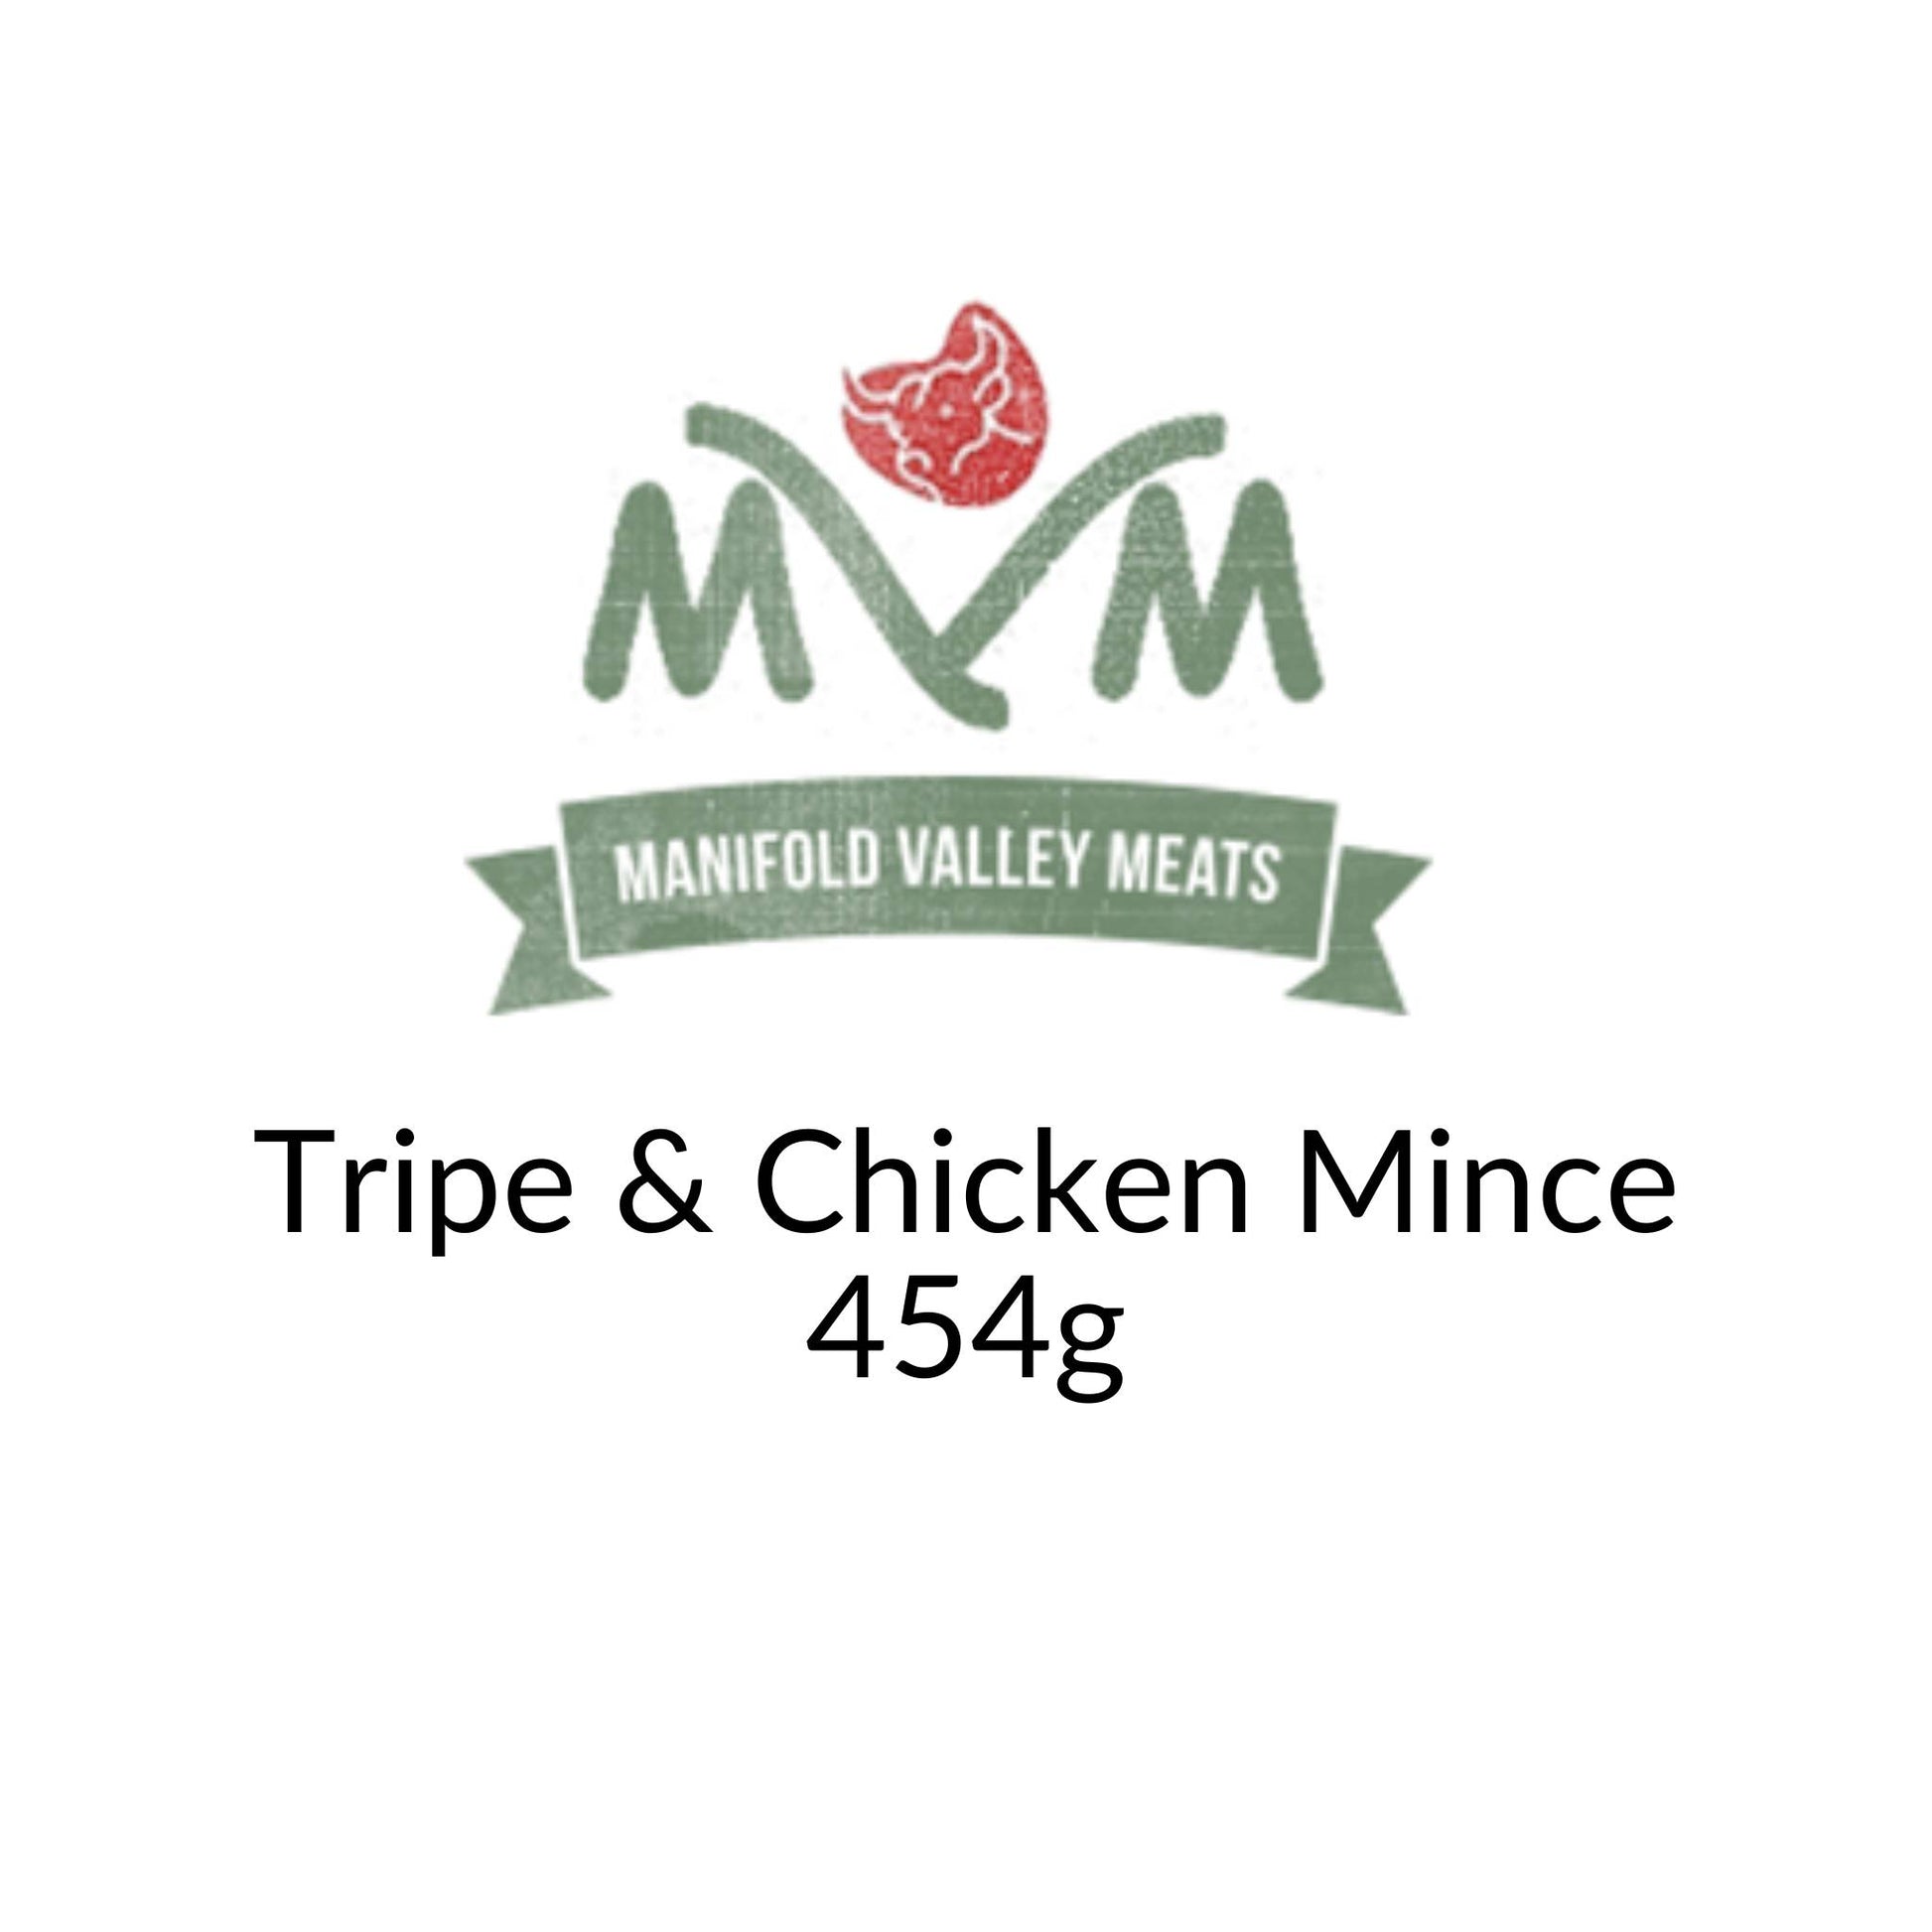 Manifold Valley Meats Tripe and Chicken Mince Raw Dog Food